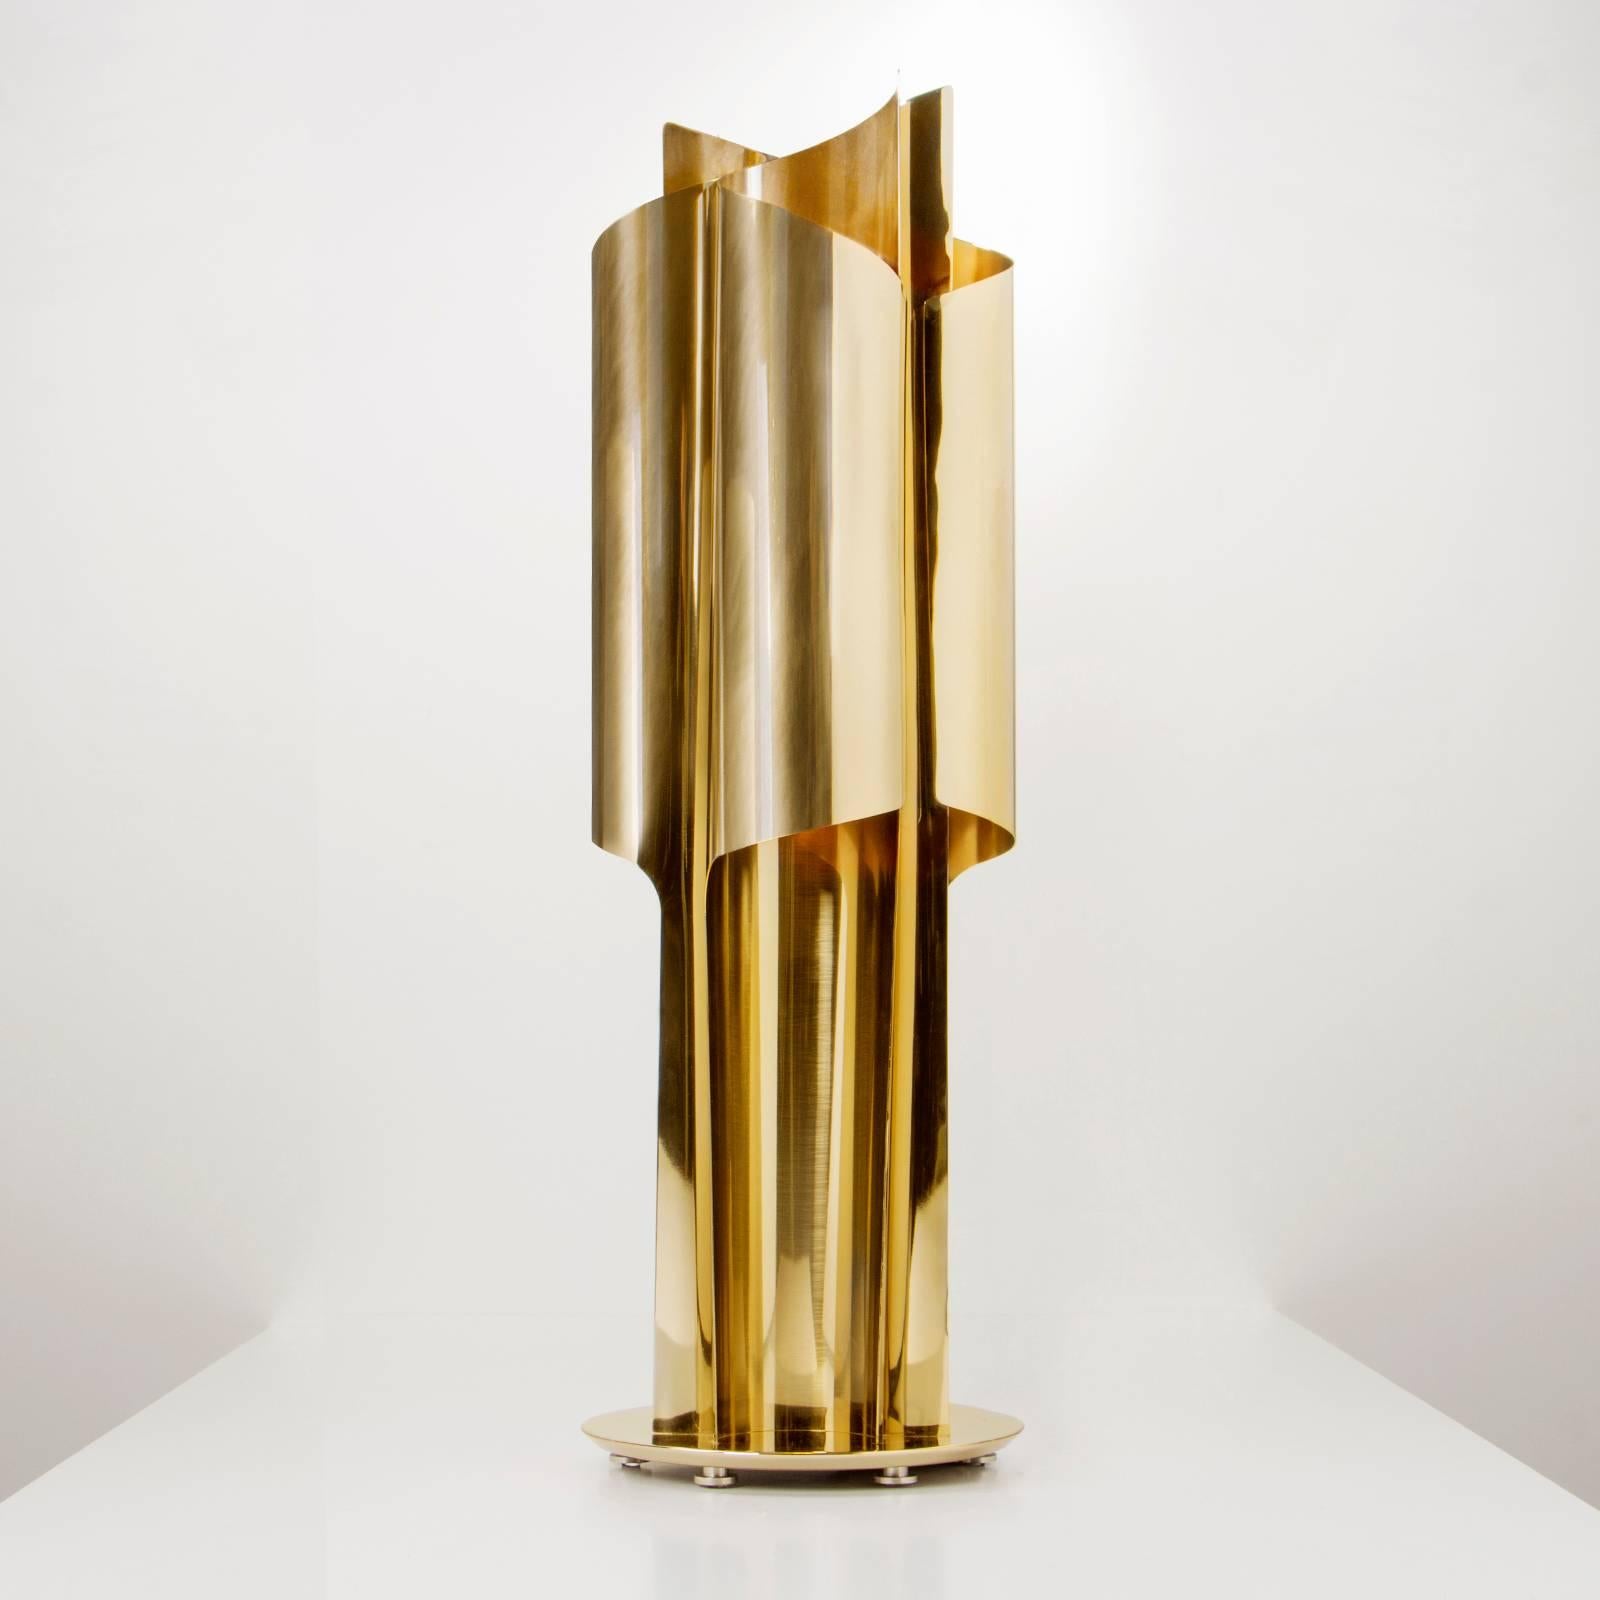 Table lamp in polished brush brass.
Sober and exceptional piece.
